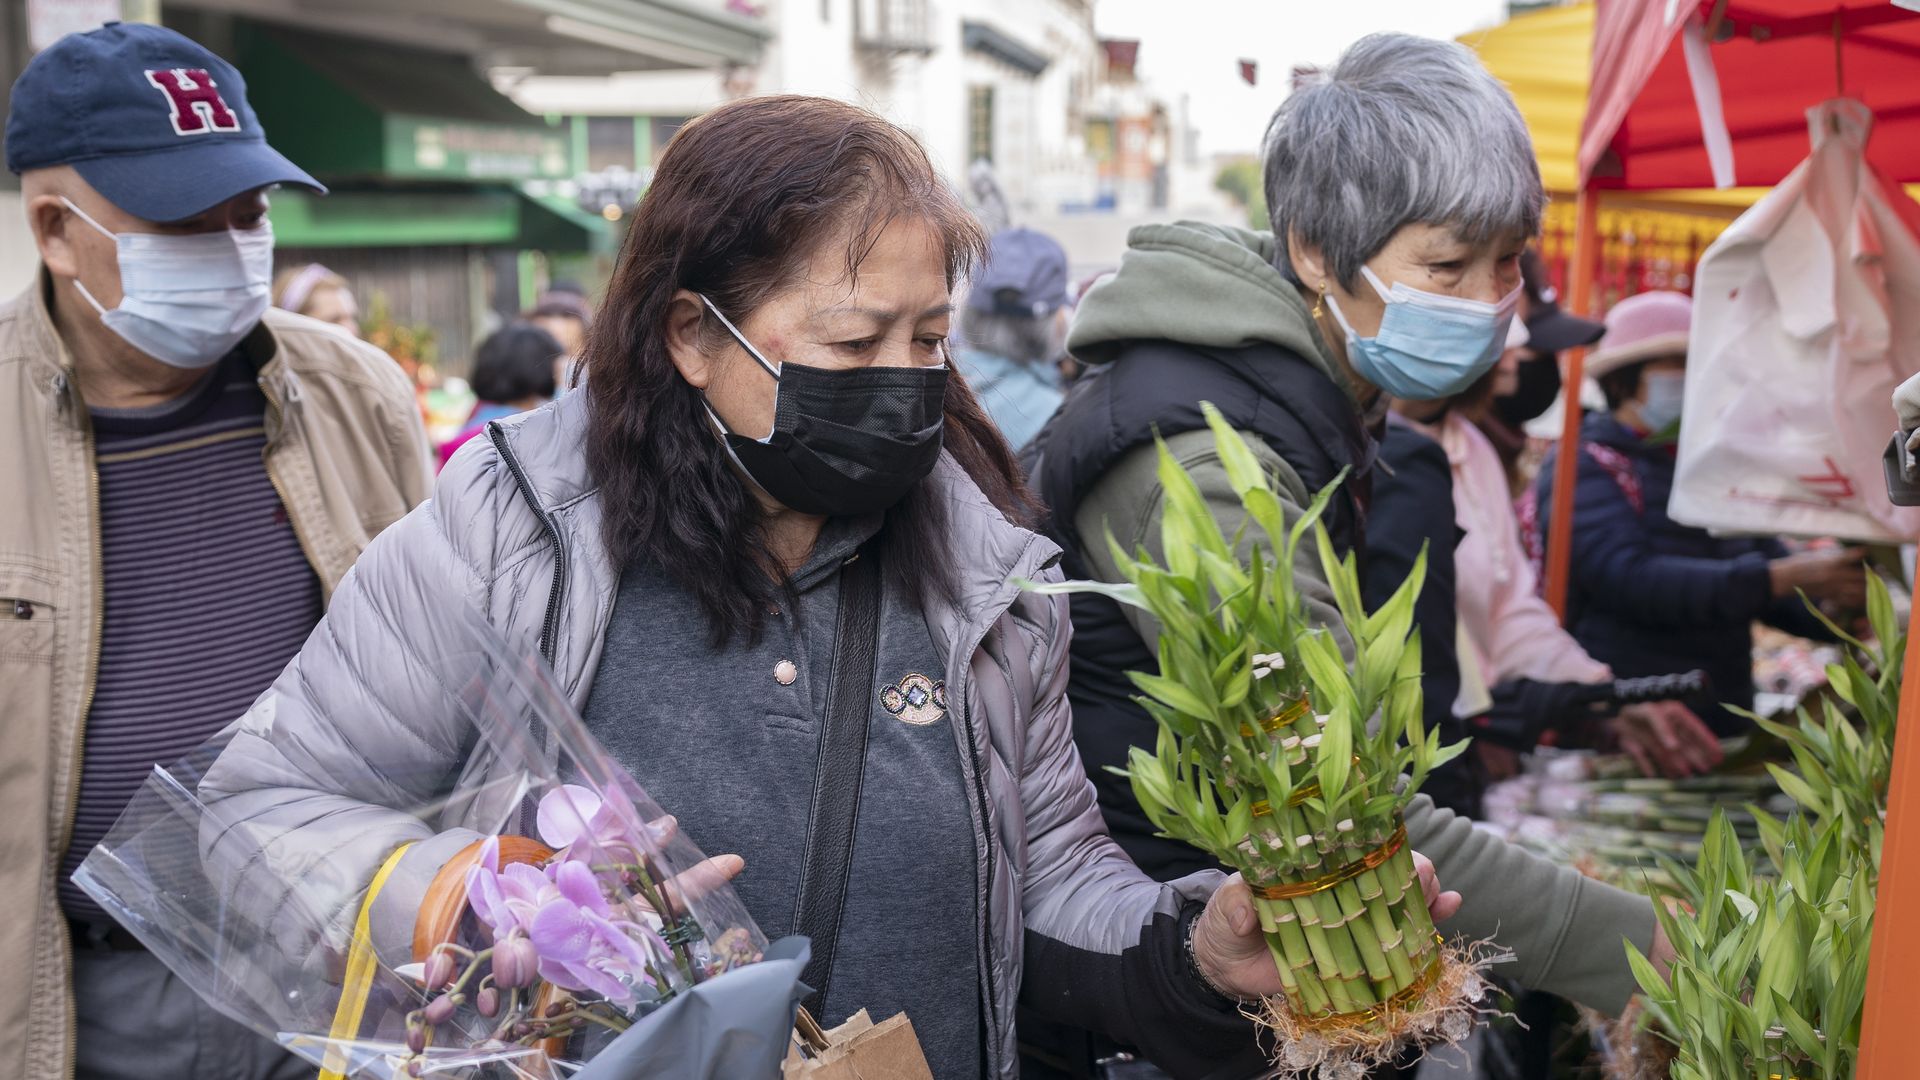 three people shop for flowers. person in front has two flowers in hand.